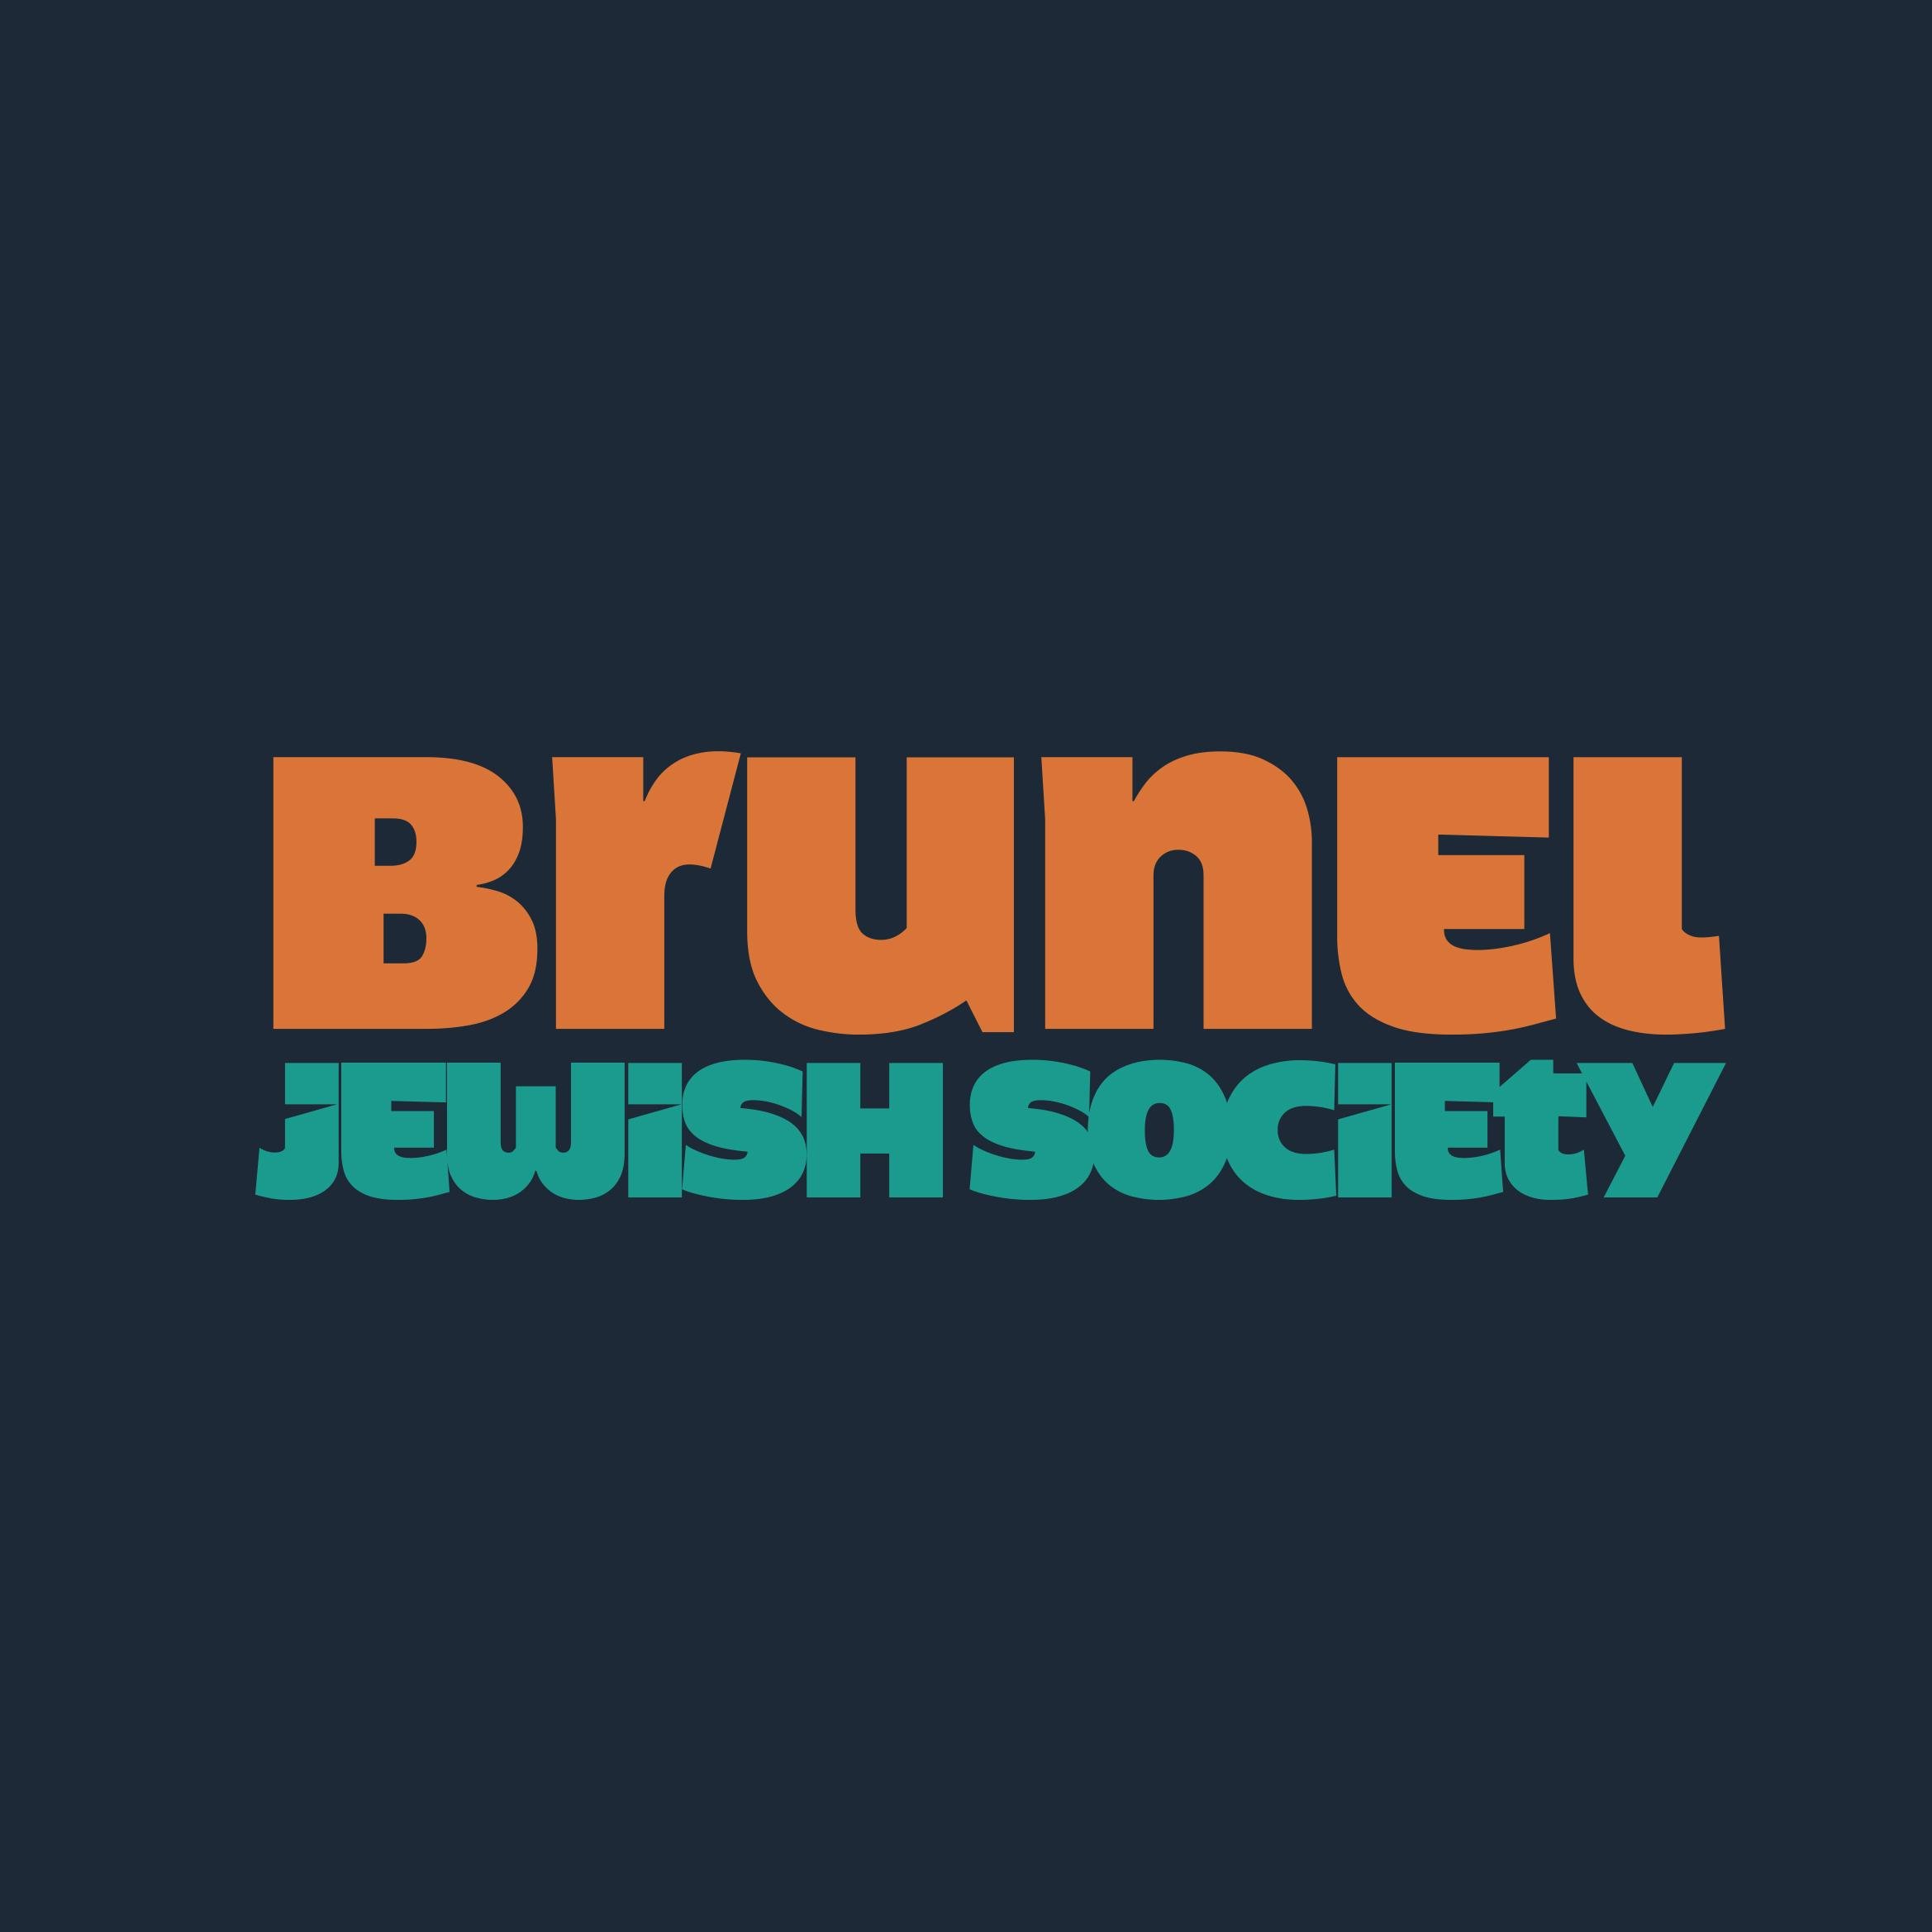 The Official Twitter of the Jewish Society at Brunel University London.